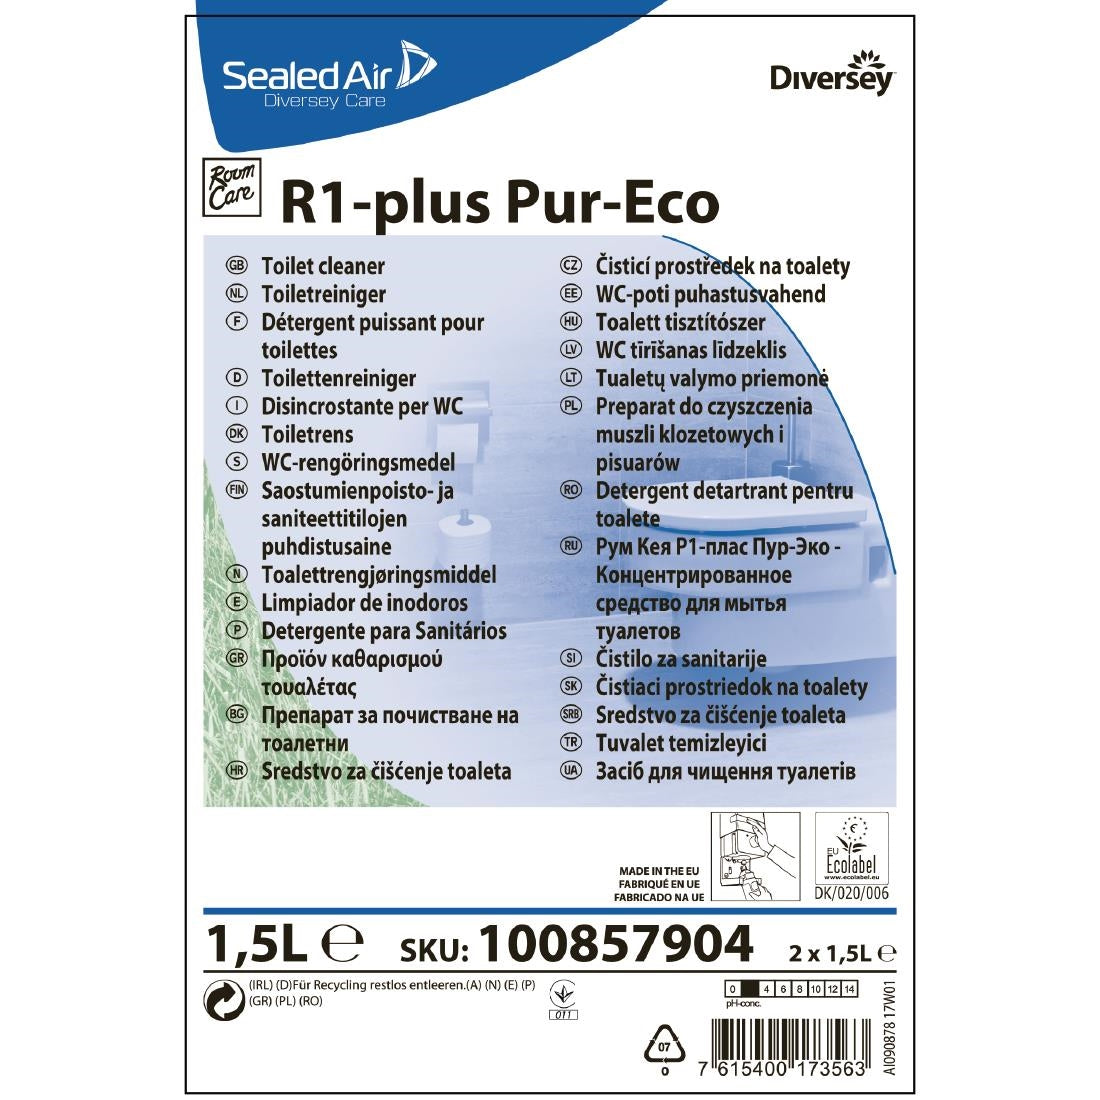 CX817 Room Care R1-plus Pur-Eco Toilet Cleaner Concentrate 1.5Ltr JD Catering Equipment Solutions Ltd